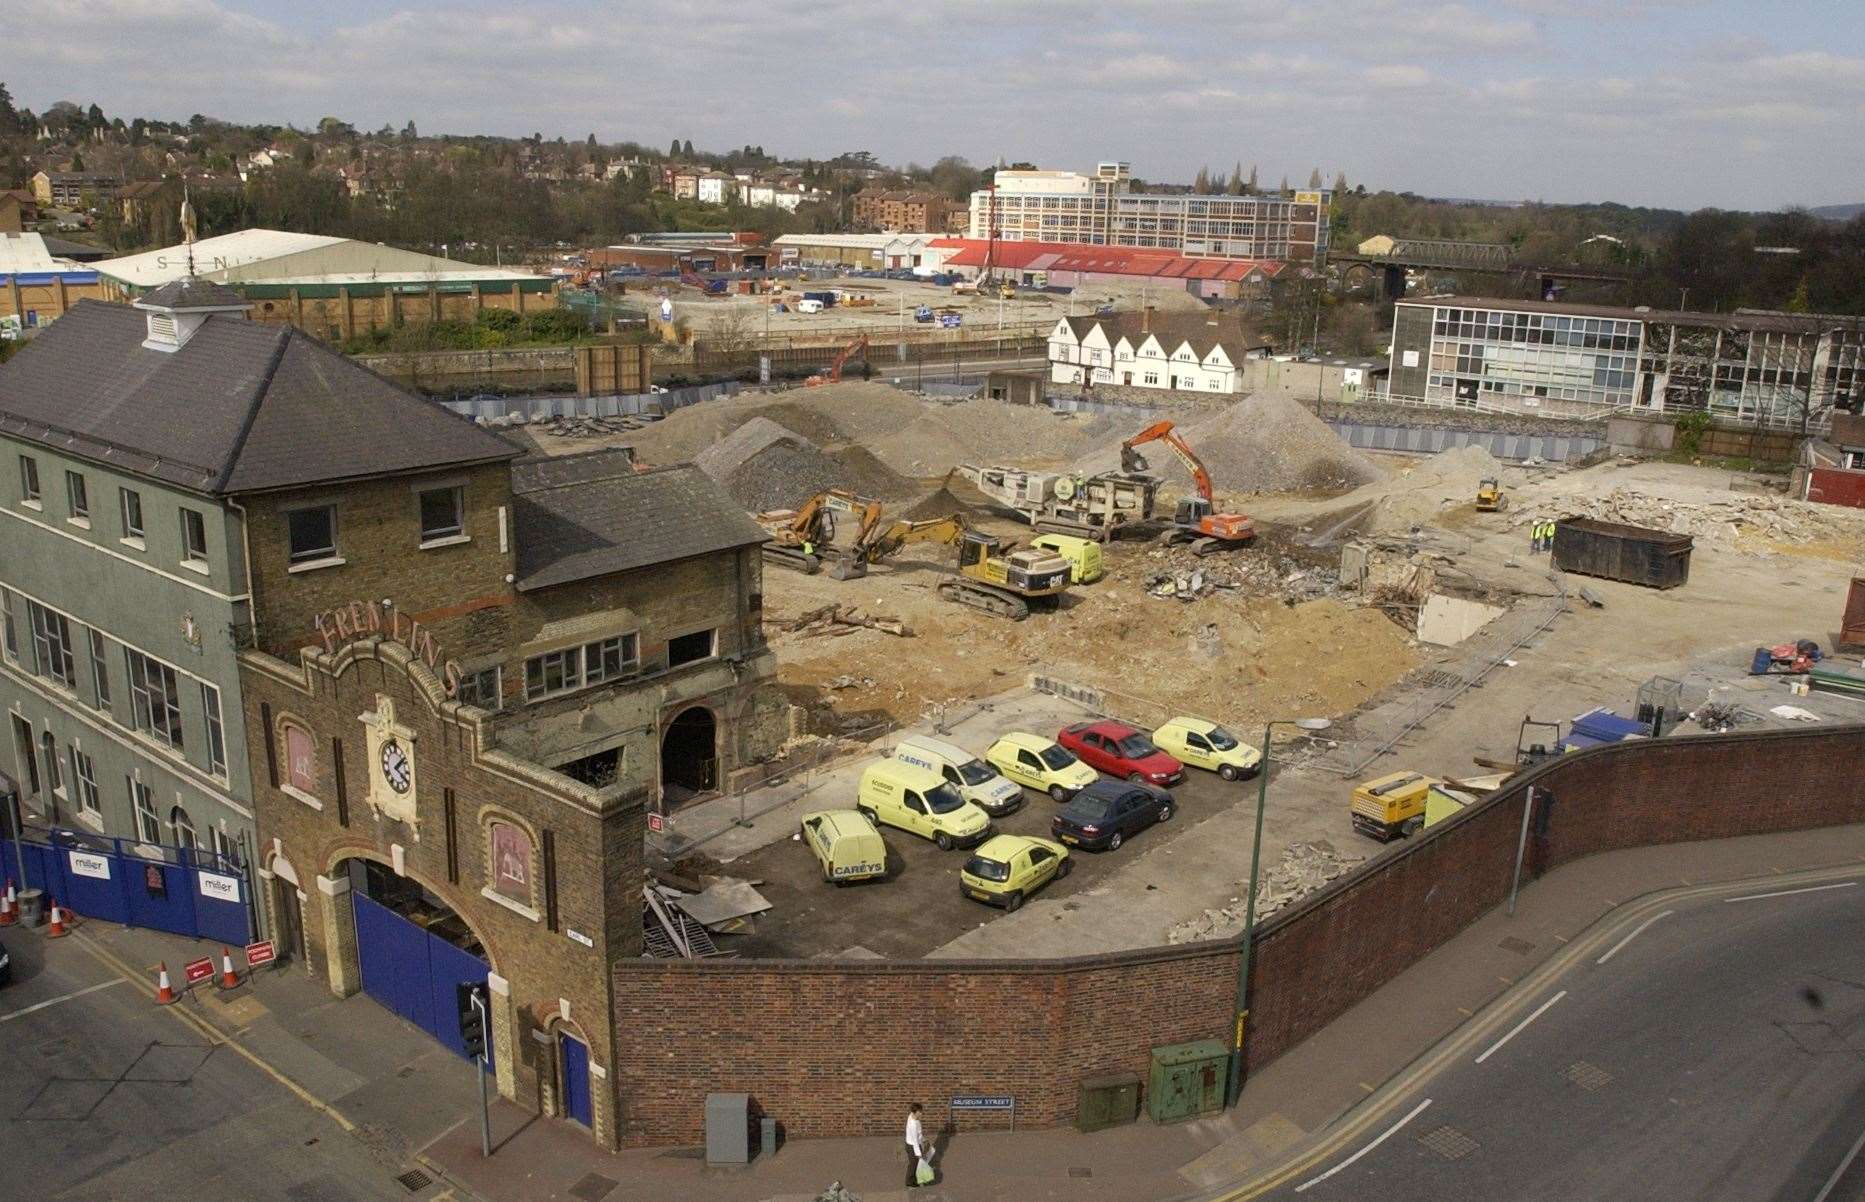 Fremlin Walk under construction on the site of the former brewery